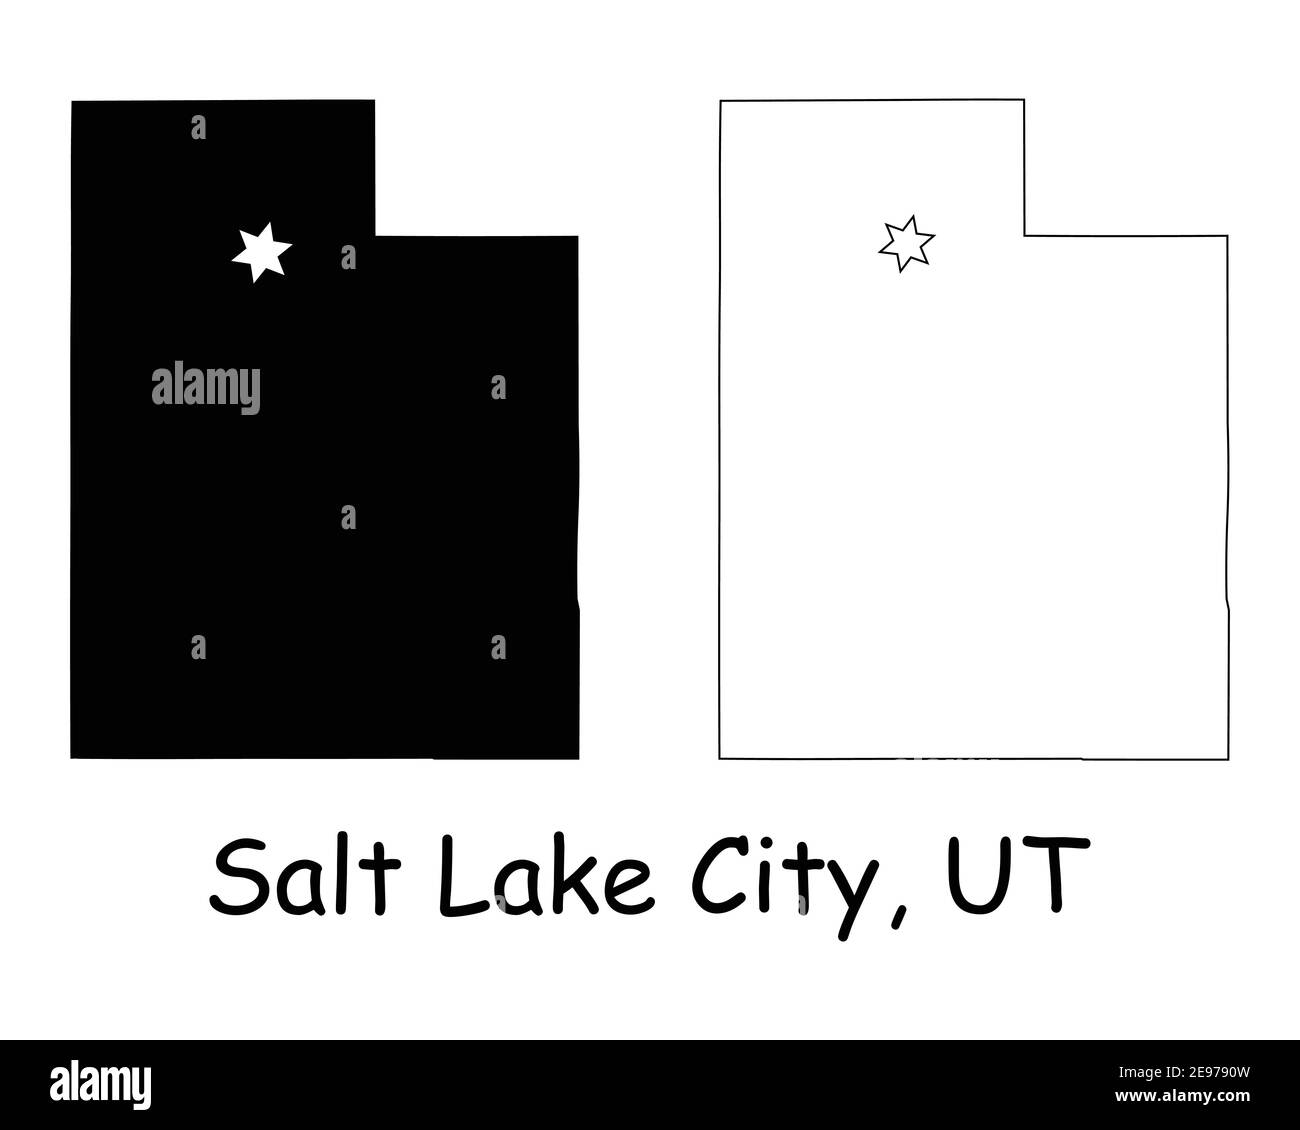 Utah UT state Map USA with Capital City Star at Salt Lake City. Black silhouette and outline isolated maps on a white background. EPS Vector Stock Vector